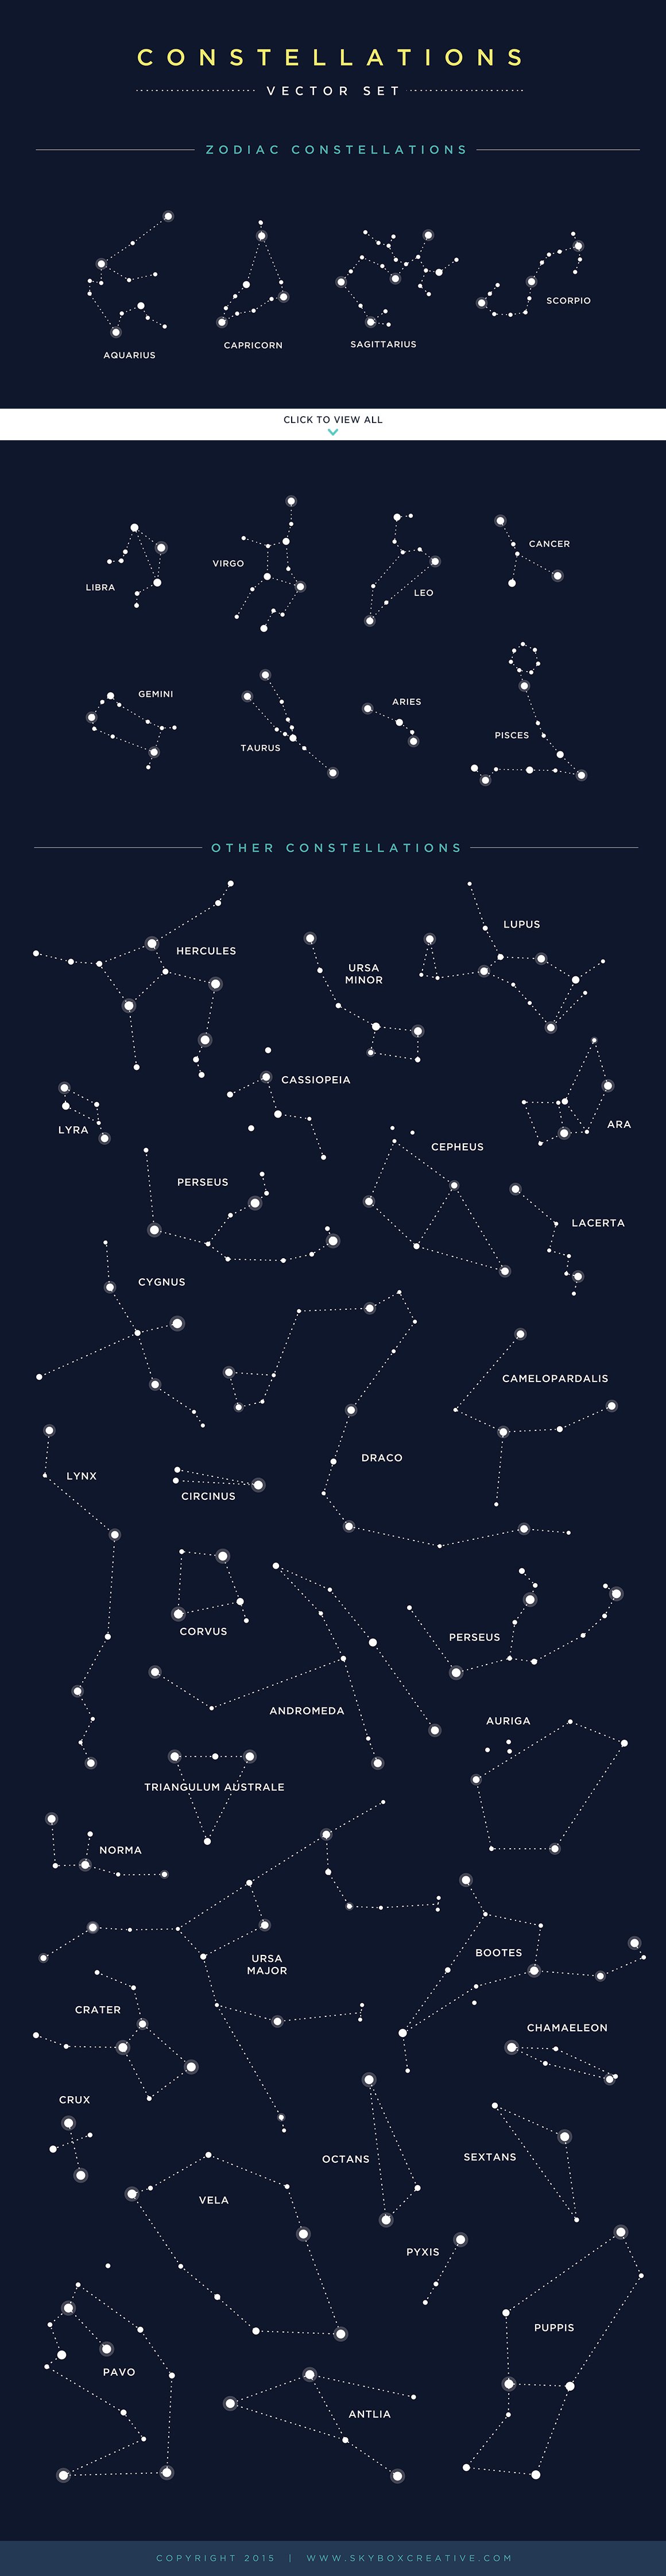 constellations vector illustrations by skybox creative more 992